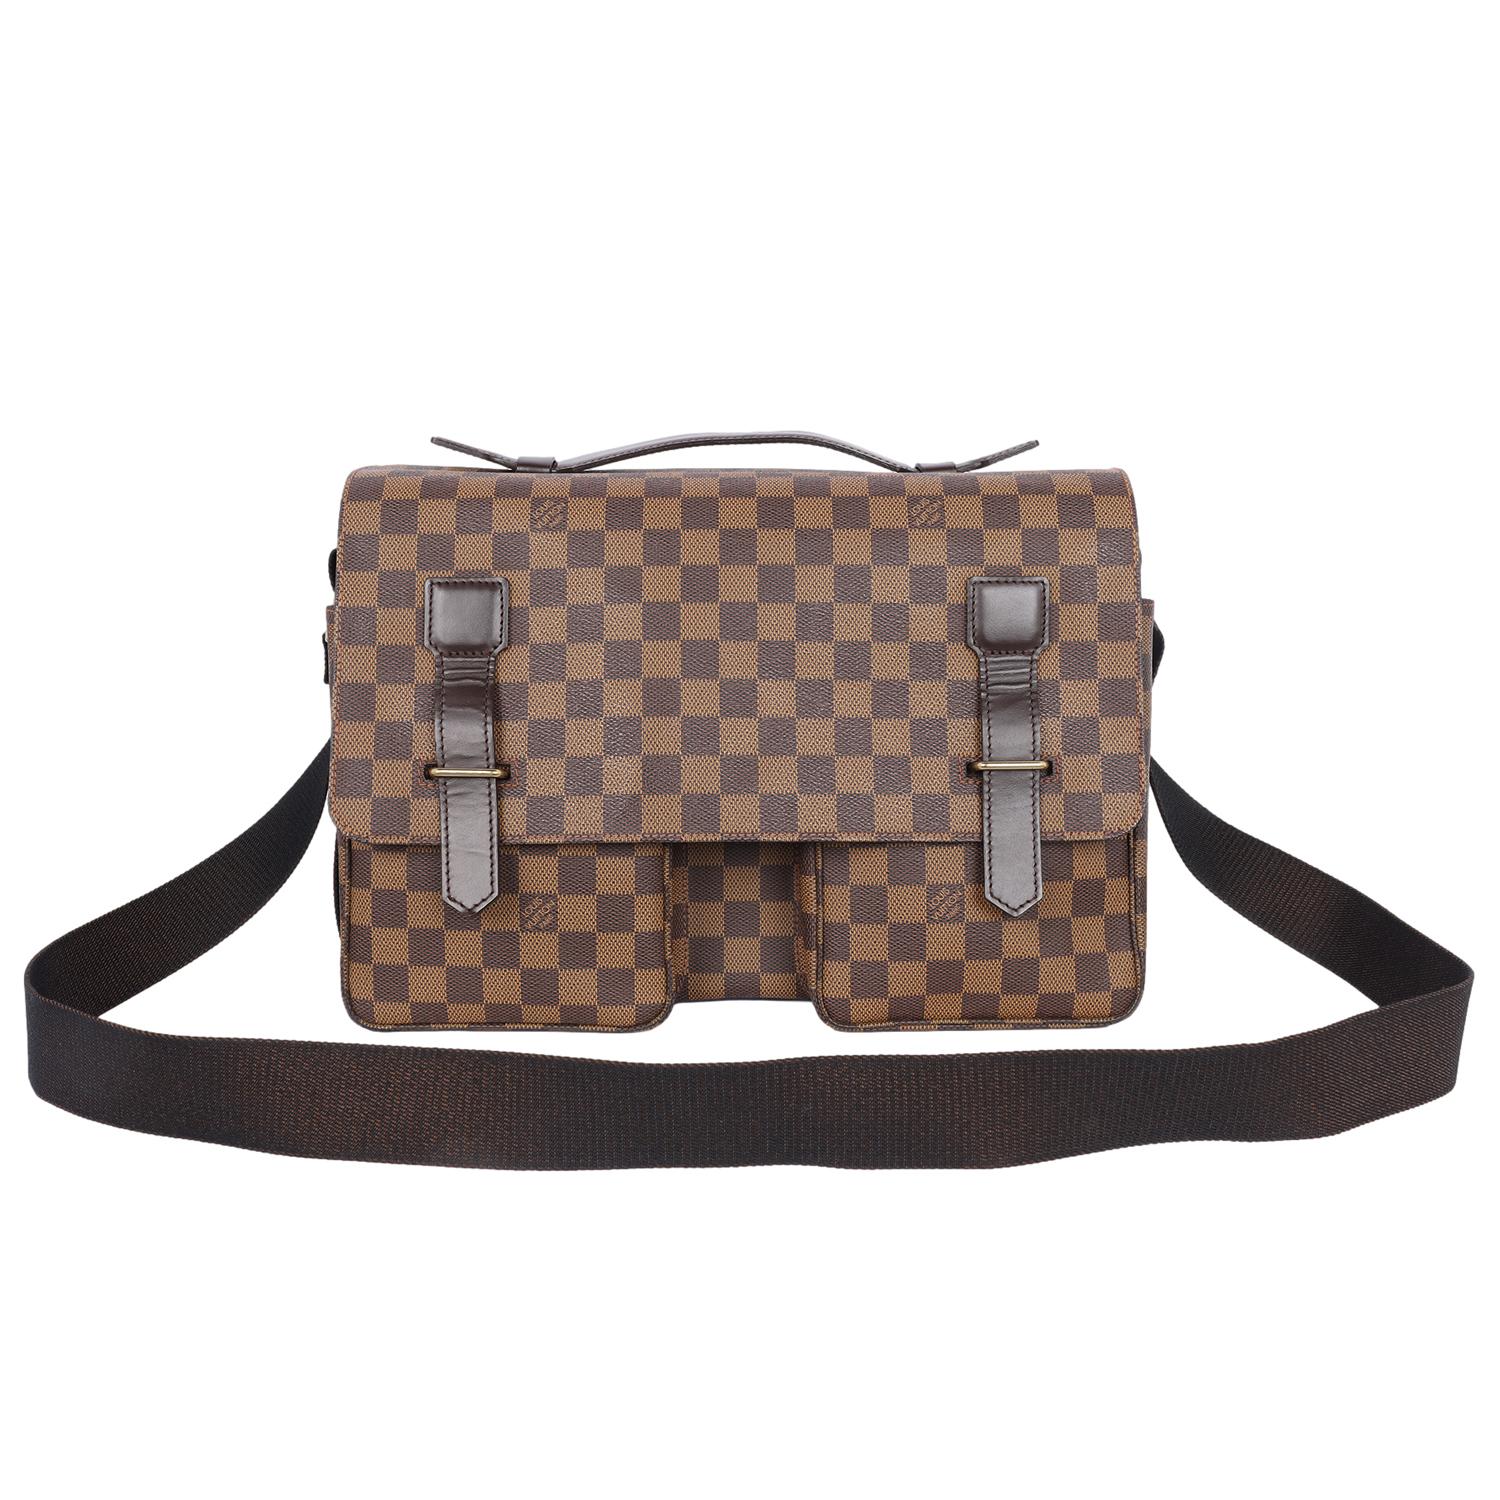 Authentic, pre-loved Louis Vuitton Broadway messenger bag in brown Damier Ebene canvas. Features flap front with two belt closures and two front pockets. The Interior has an orange lining with 2 open exterior and interior pockets. 

Great unisex bag